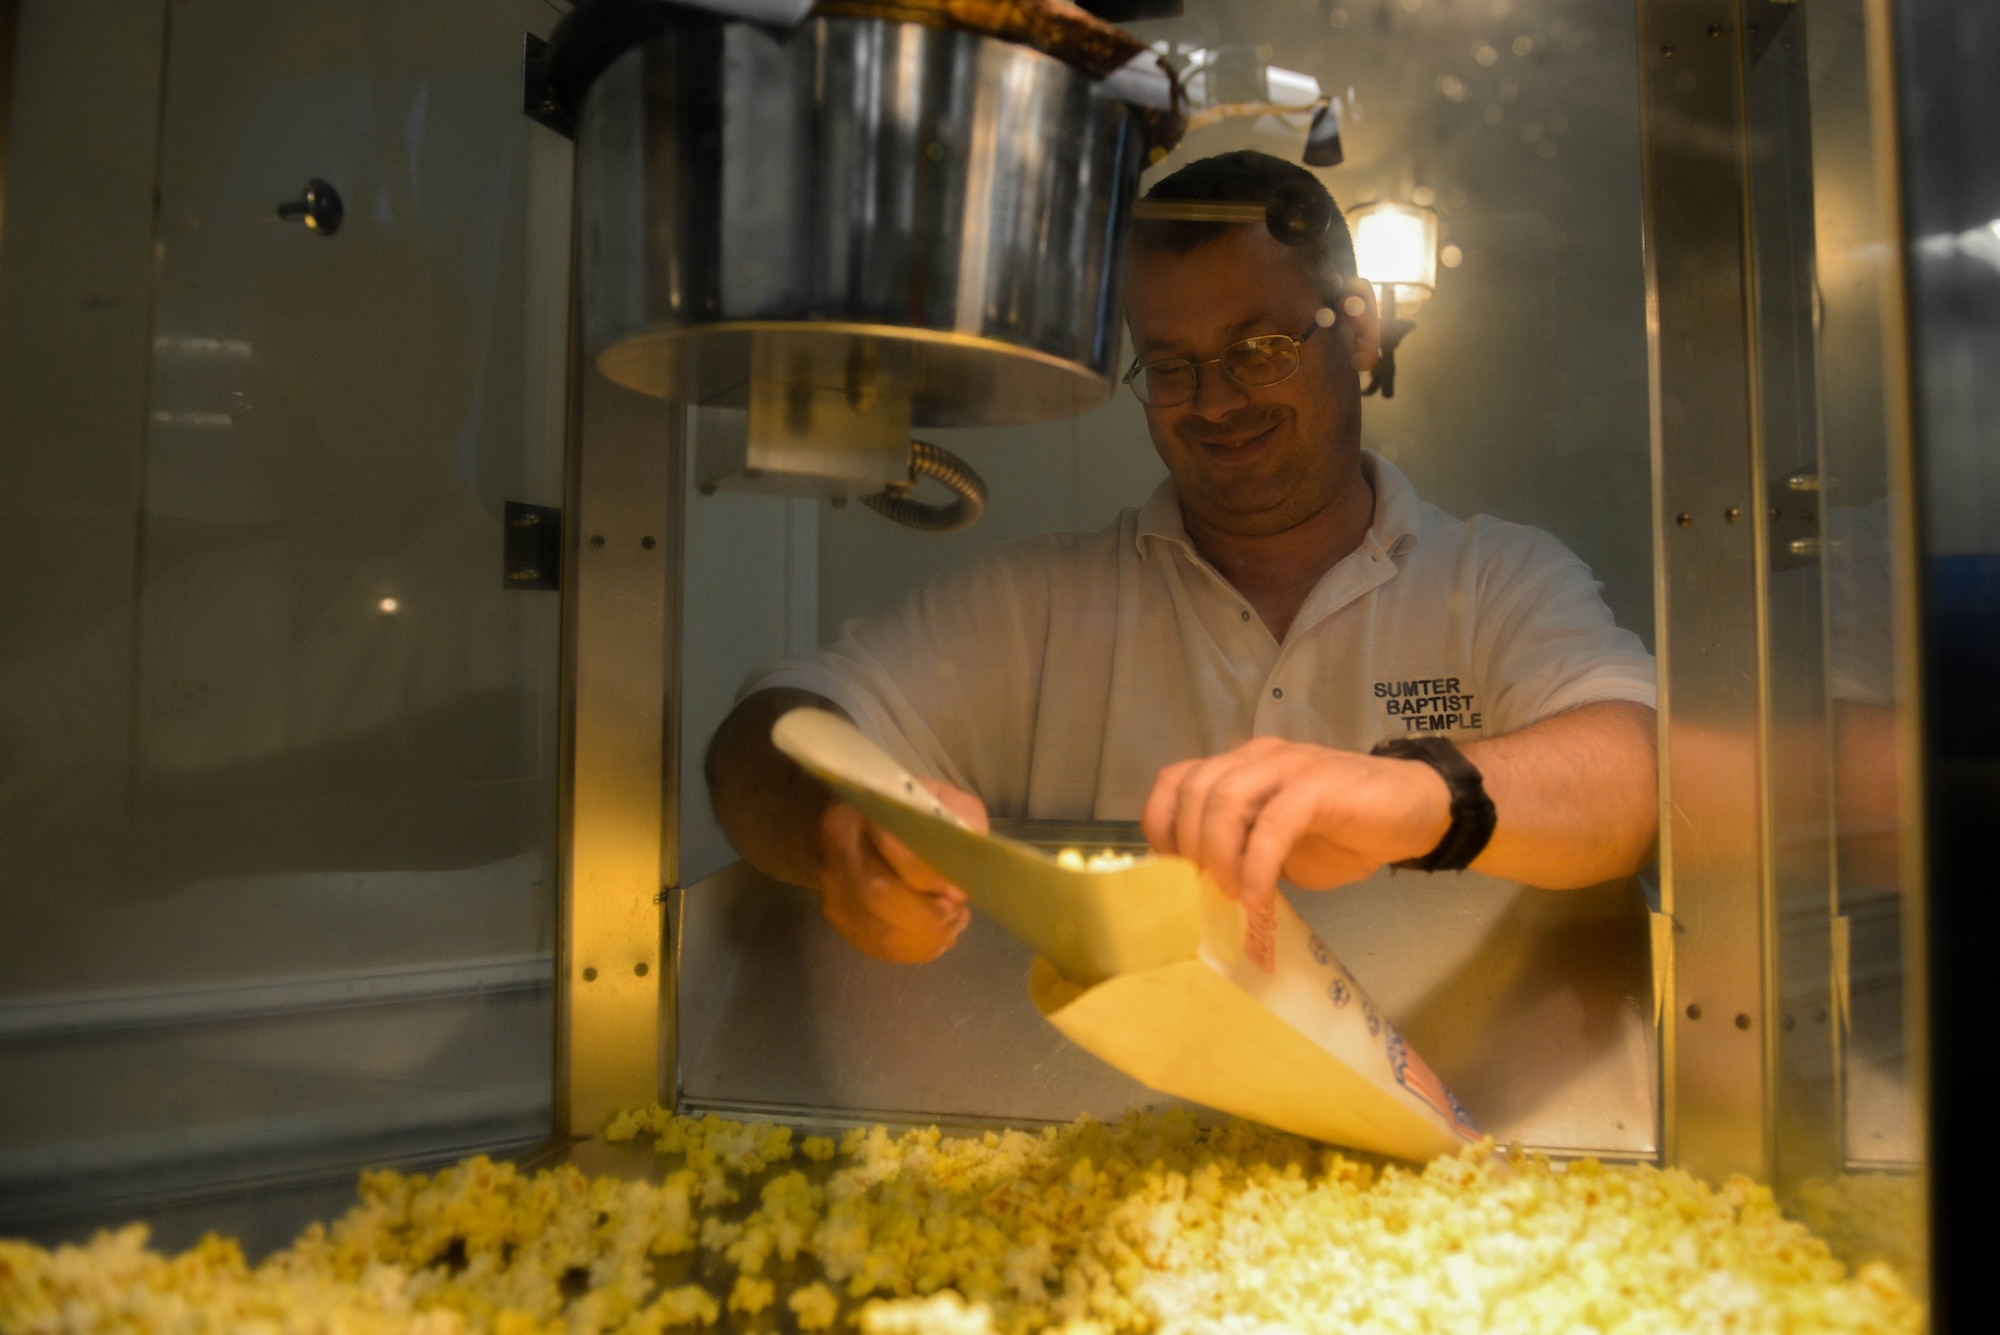 U.S. Air Force Master Sgt. Richard Essigmann, 20th Equipment Maintenance Squadron programs noncommissioned officer in charge and volunteer, scoops popcorn into bags during a Deployed Family Dinner at the Carolina Skies Club and Conference Center at Shaw Air Force Base, S.C., July 24, 2017. The Deployed Family Dinner provided an opportunity for the families of deployed service members to socialize, build resiliency and share a meal together. (U.S. Air Force photo by Airman 1st Class Destinee Sweeney)